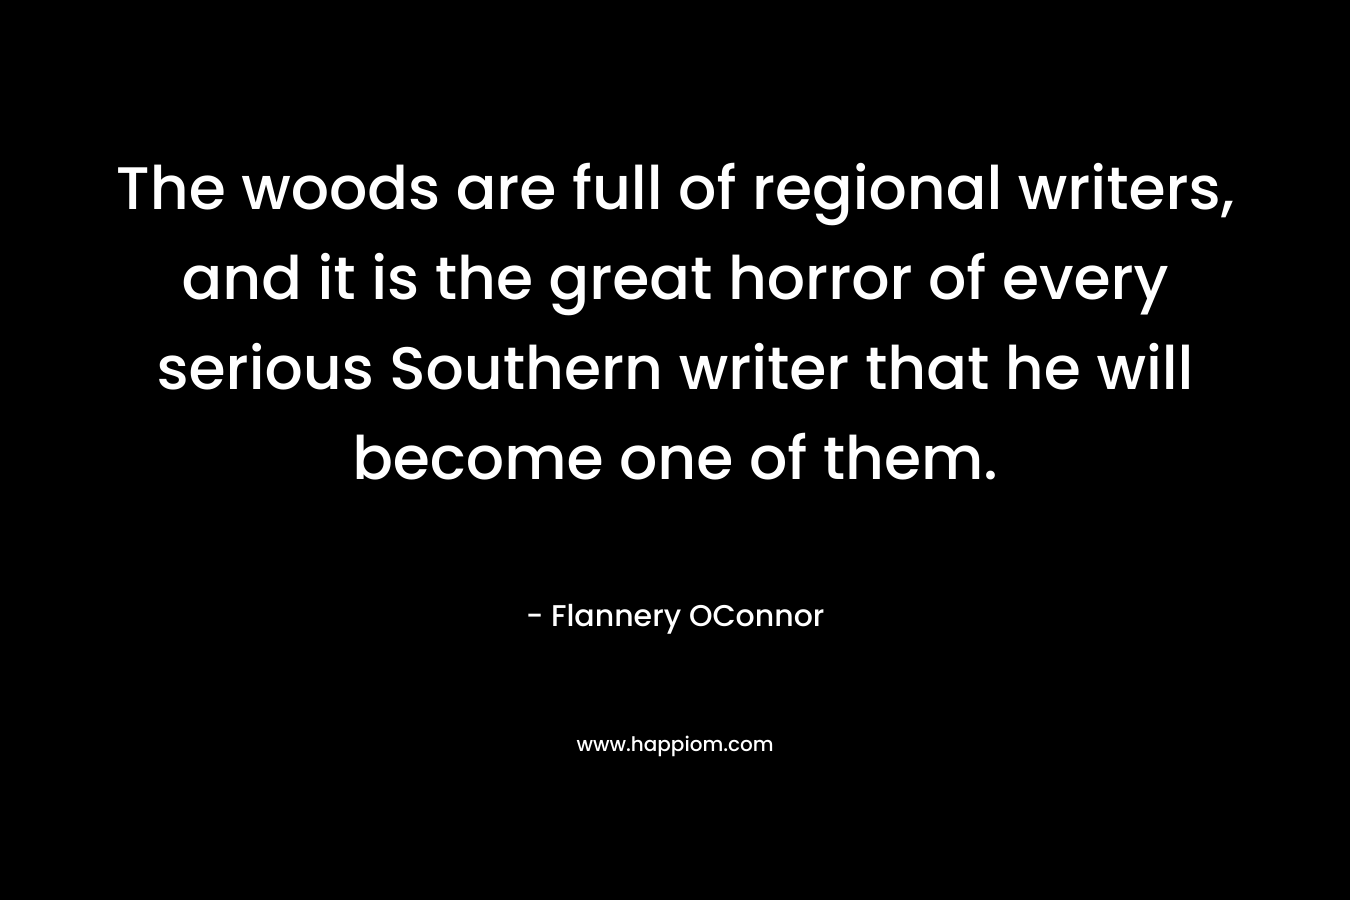 The woods are full of regional writers, and it is the great horror of every serious Southern writer that he will become one of them.